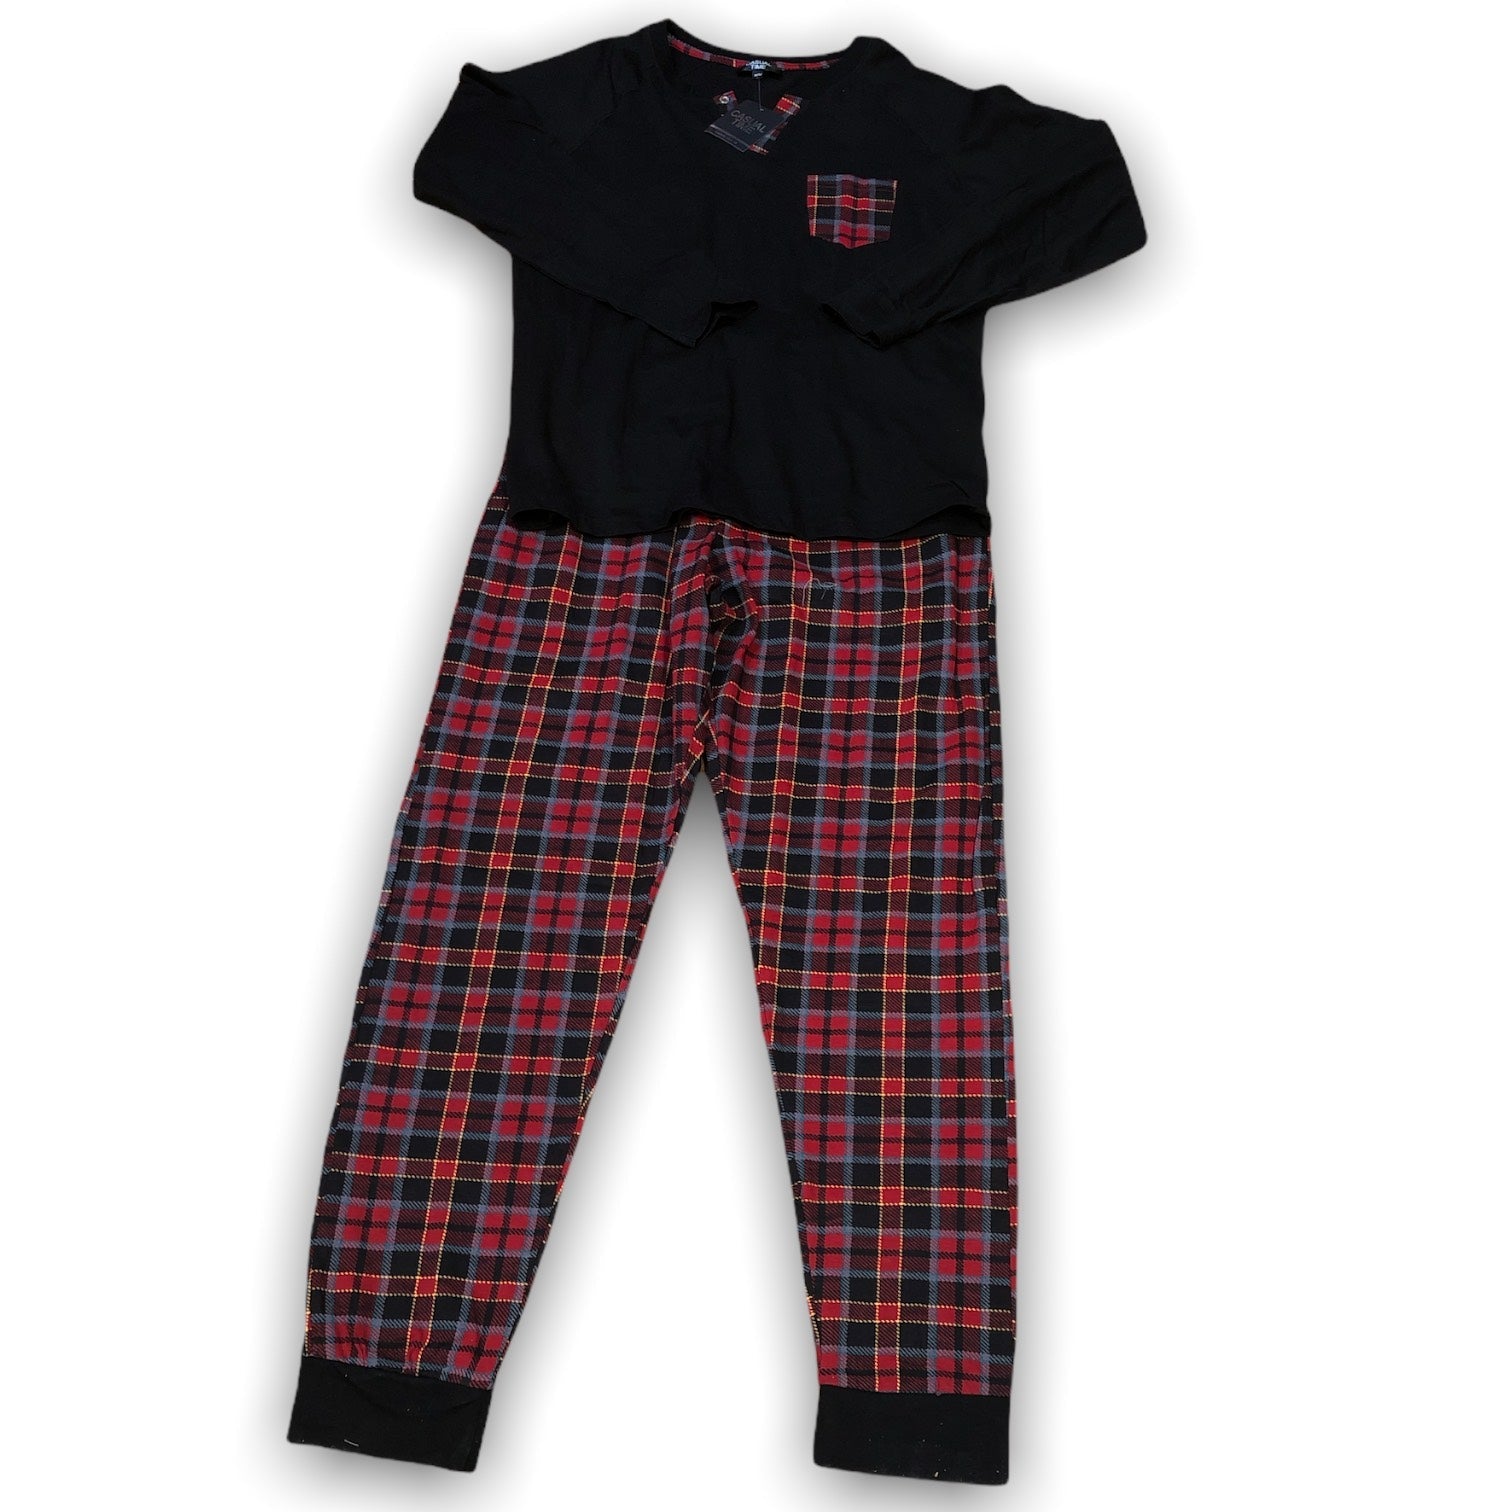 BULK BUY - Men's Two Piece 100% Cotton Knit Pajama Set with Screen Print (Gift Packaged)(6-Pack)